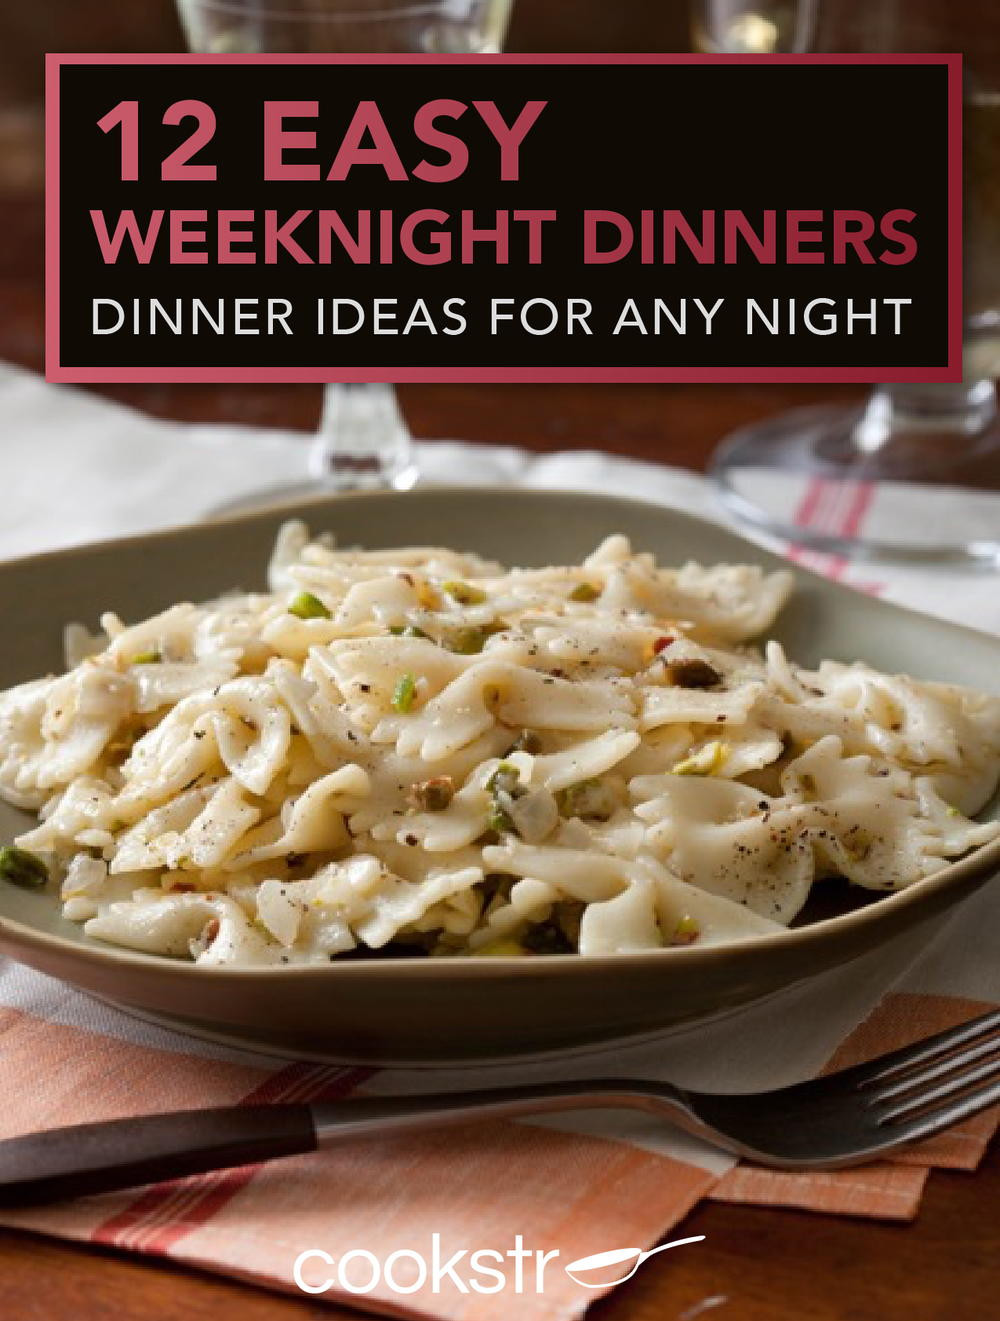 Quick Weeknight Dinners For Two
 12 Easy Weeknight Dinners Dinner Ideas for Any Night